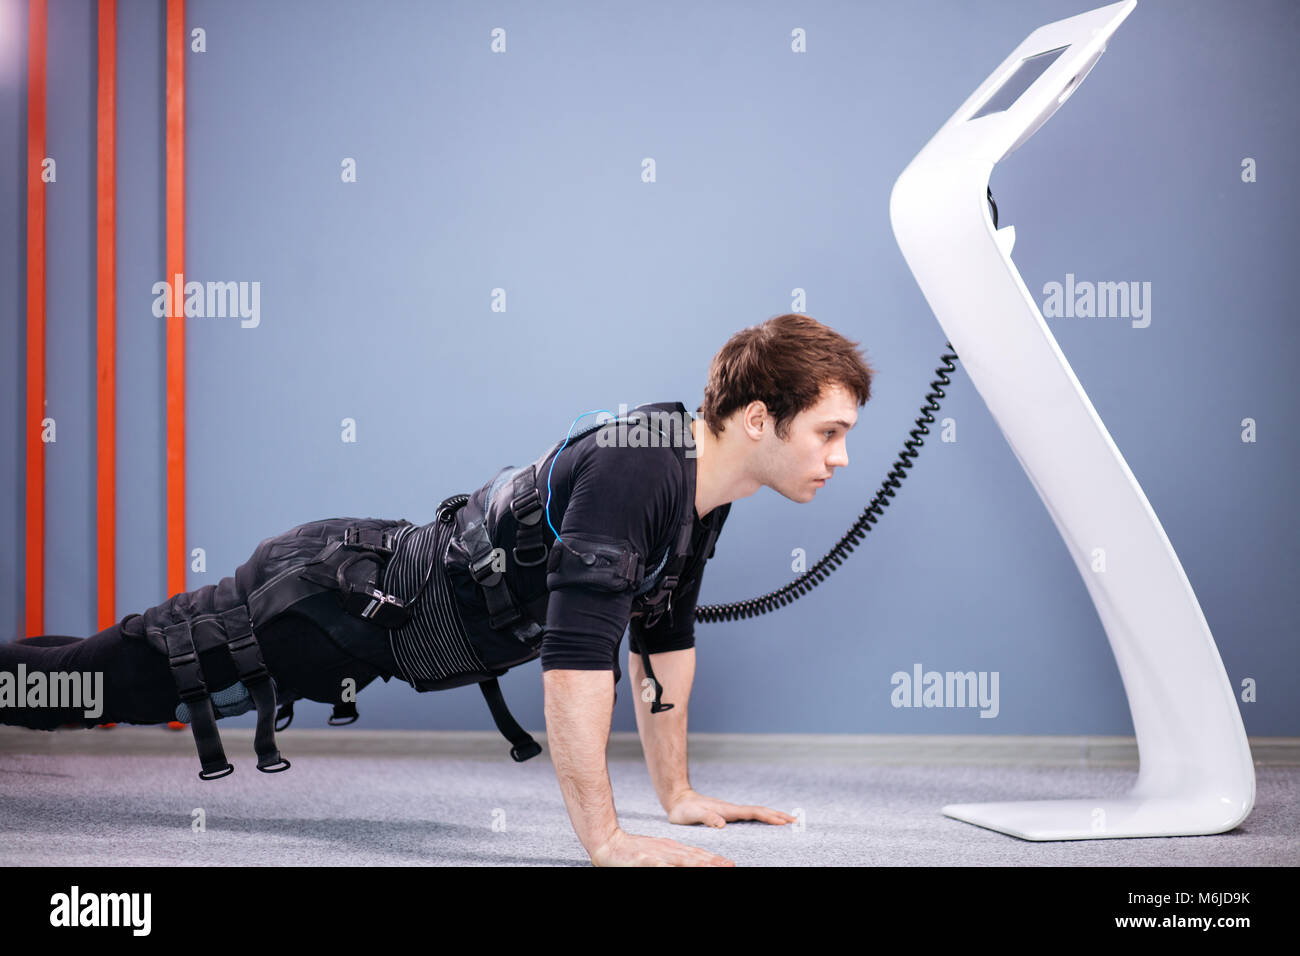 https://c8.alamy.com/comp/M6JD9K/man-in-electrical-muscular-stimulation-suits-doing-plank-exercise-M6JD9K.jpg